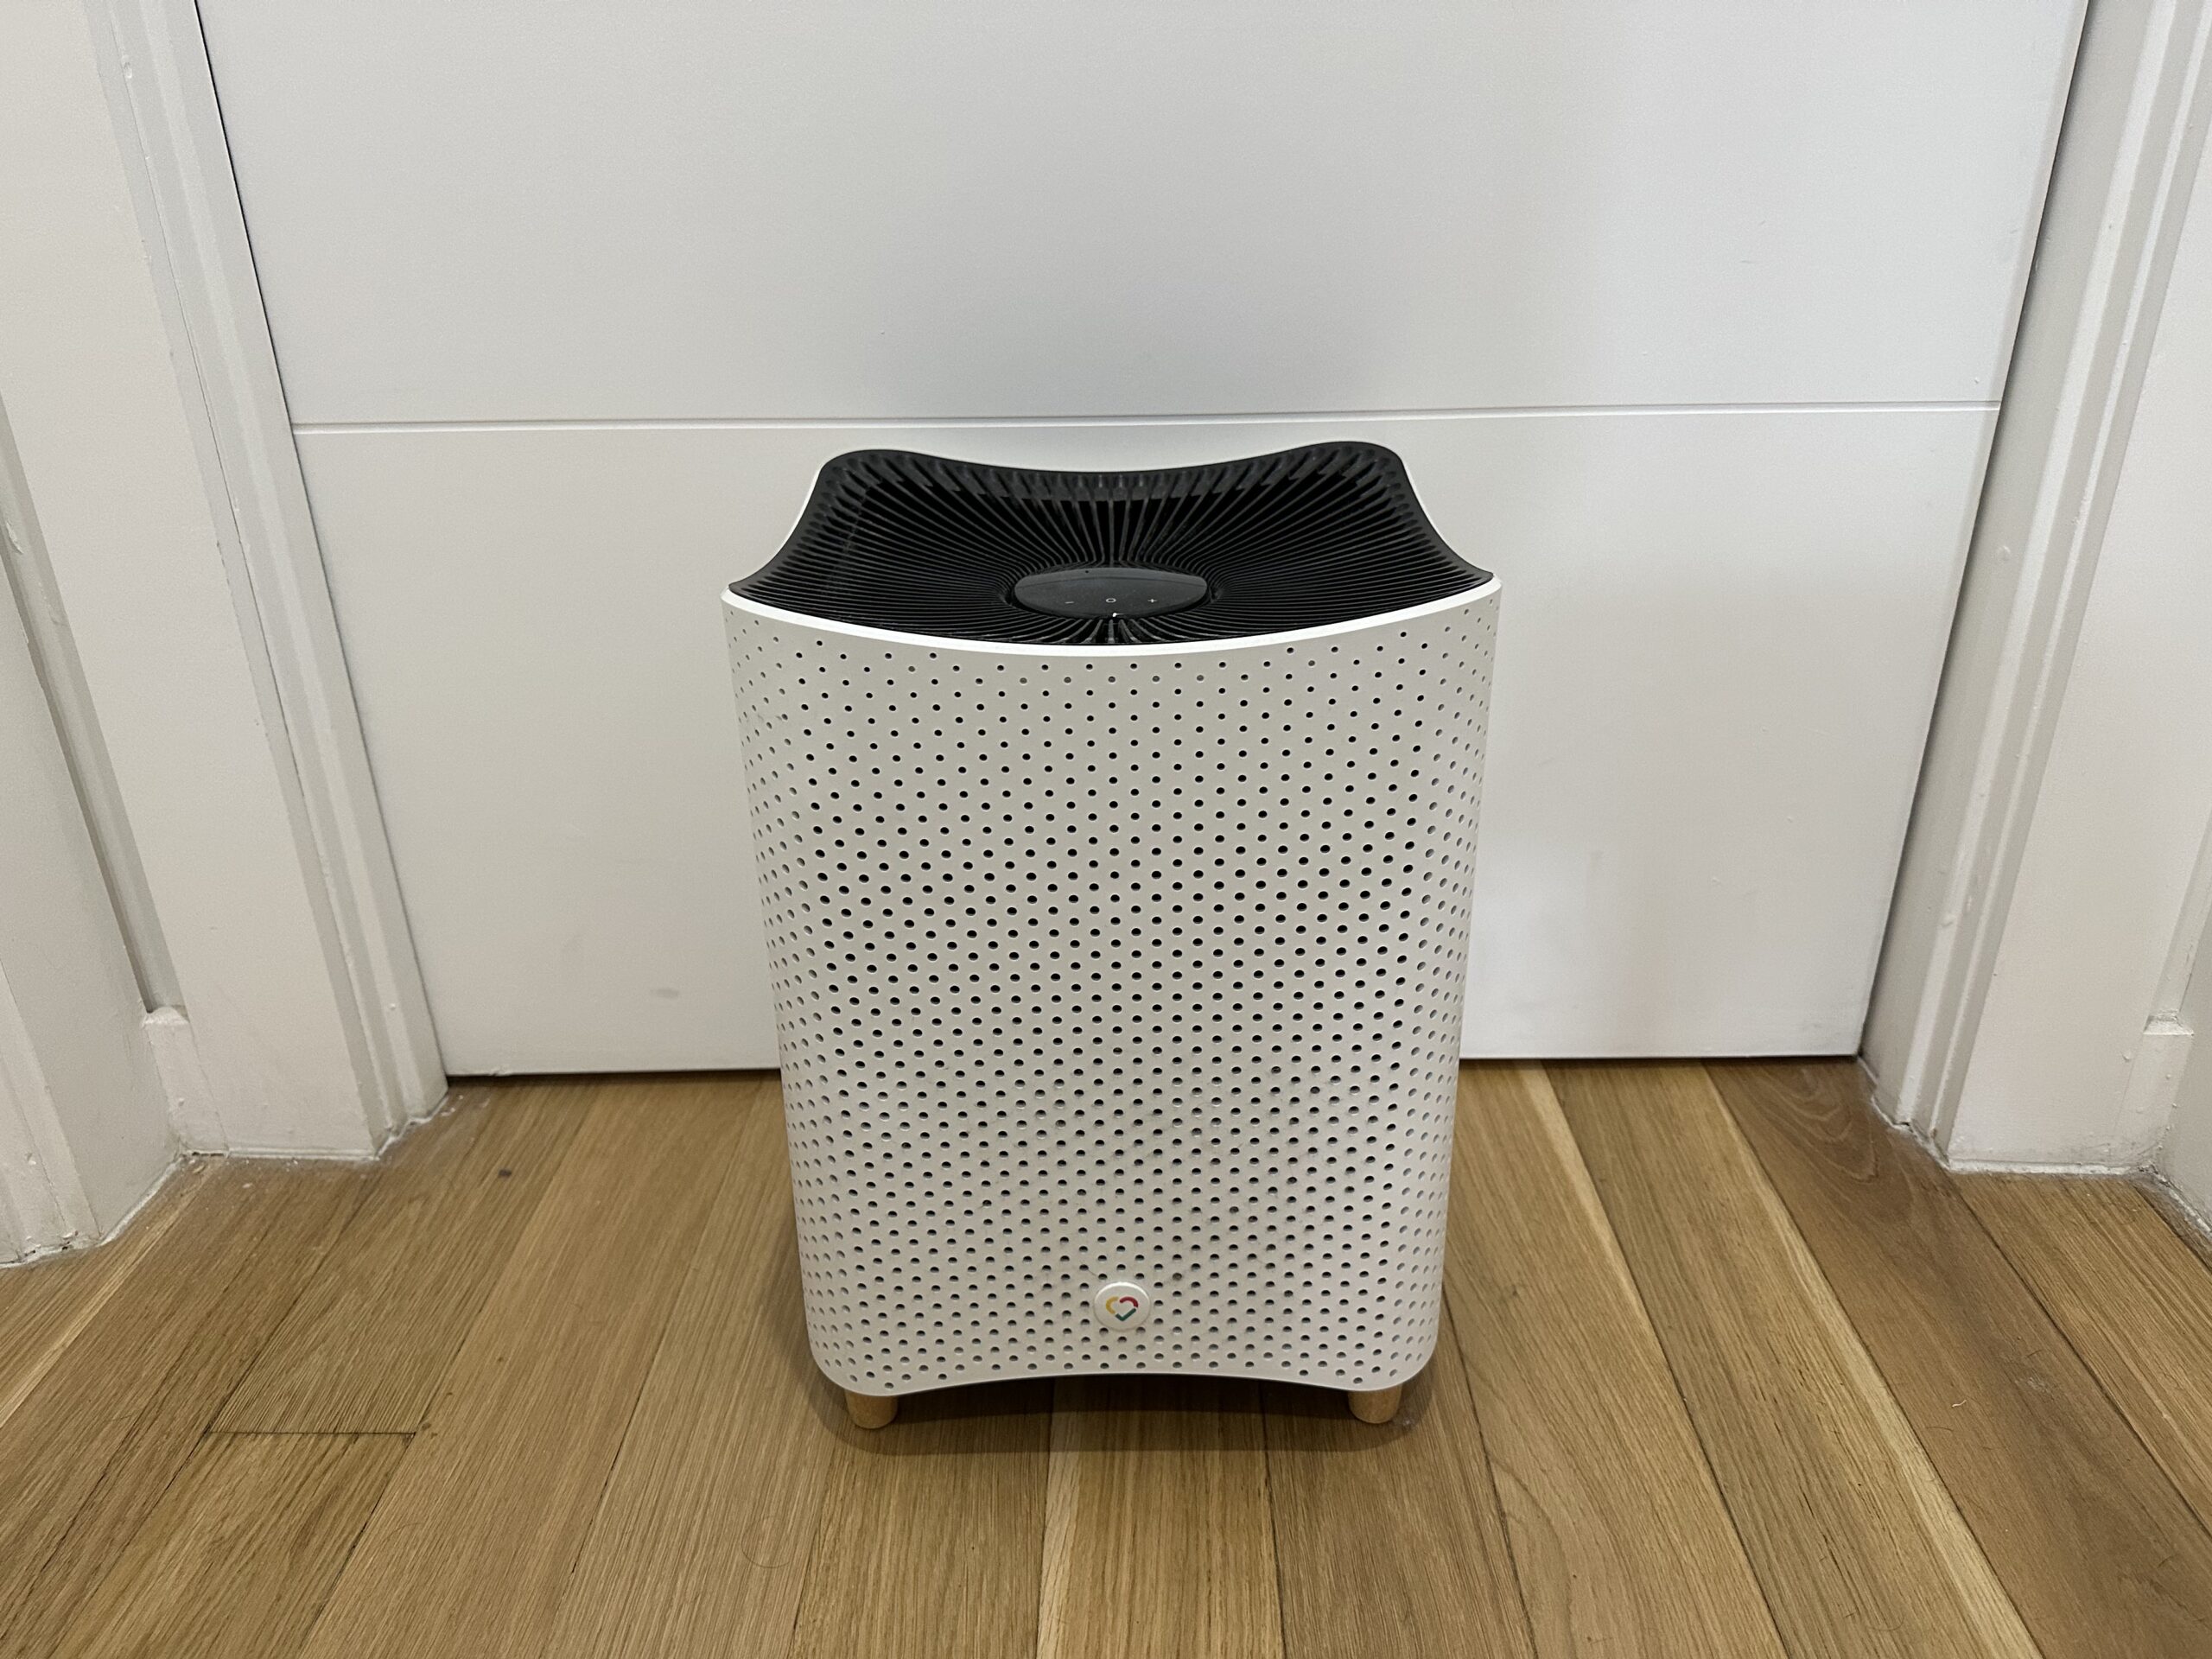 Mila smart air purifier on a light wooden floor in front of a closed white door